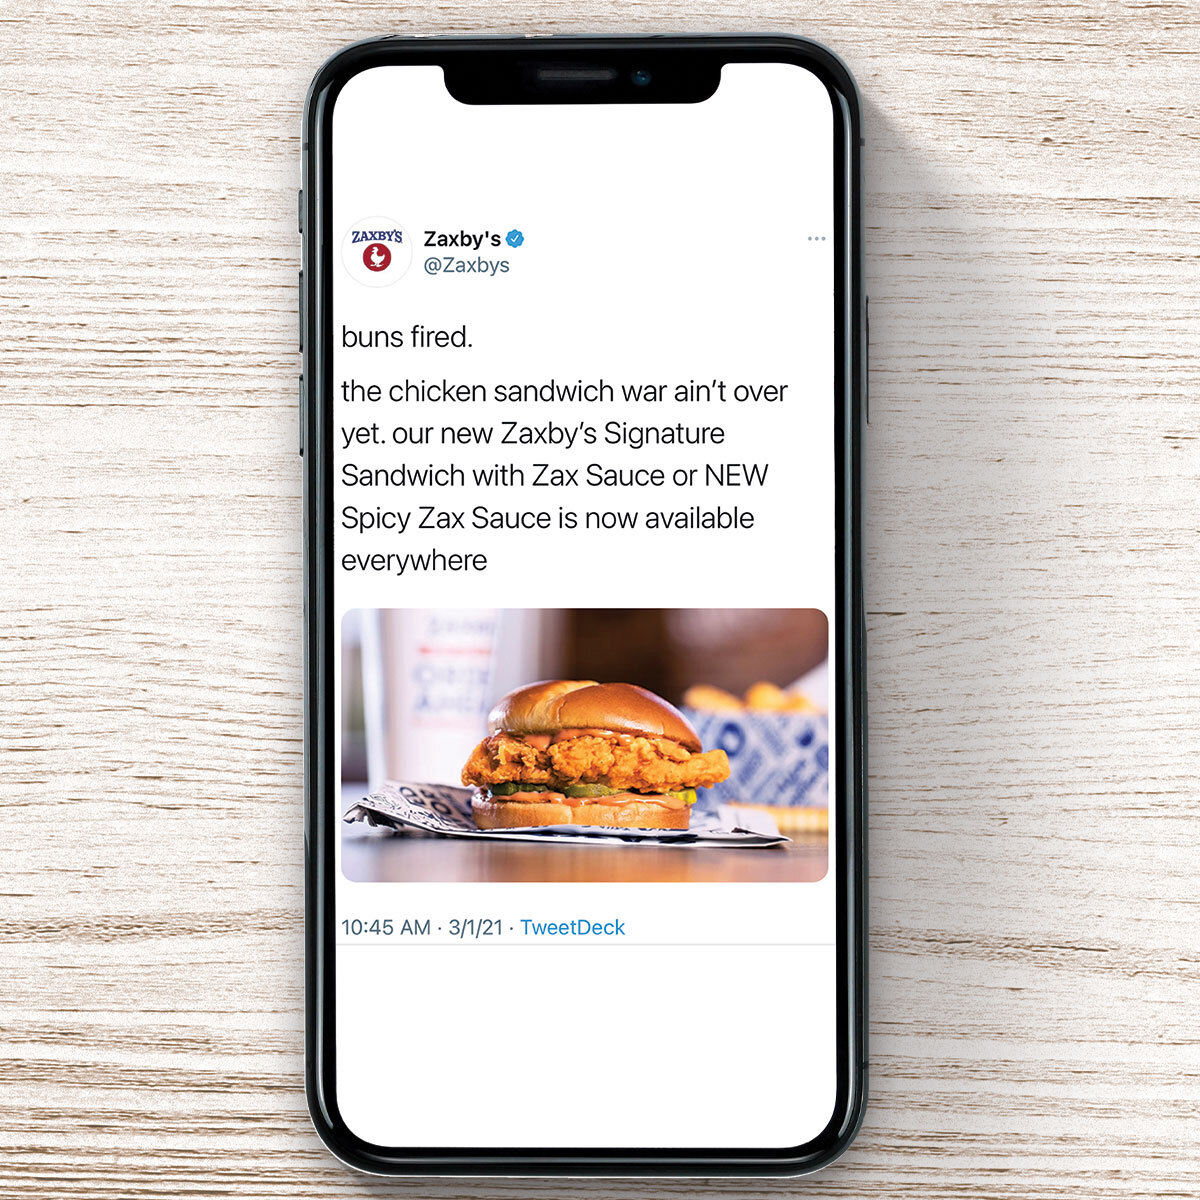 Zaxby’s commemorated the national rollout of its Signature Sandwich with a "buns fired" tweet.